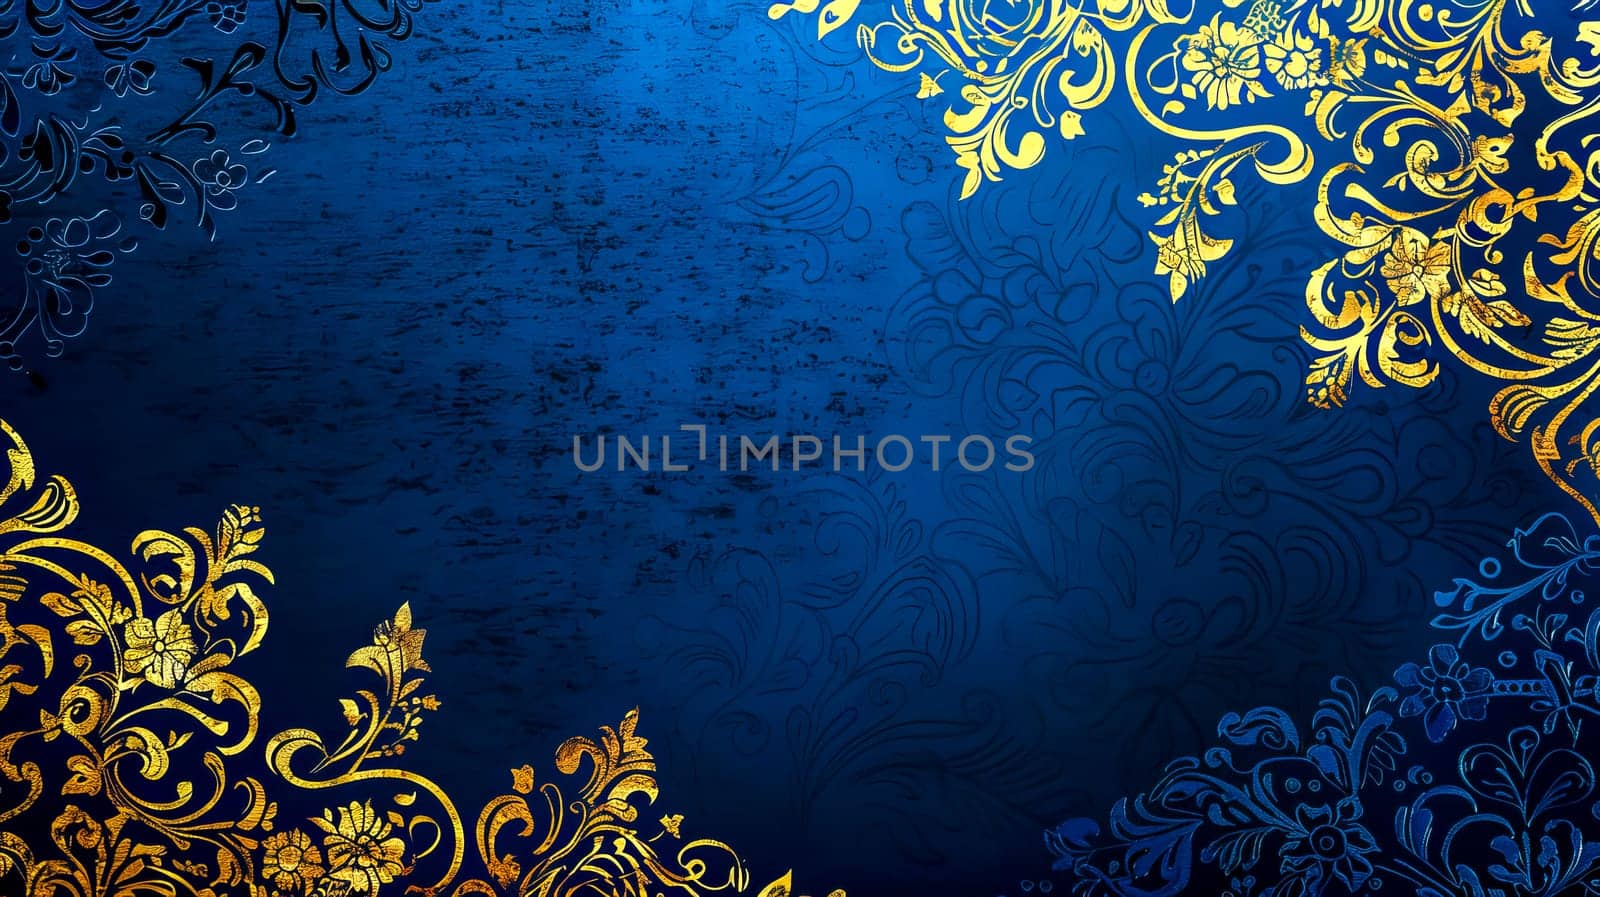 Luxurious blue background with intricate gold floral patterns, ideal for high-end design use